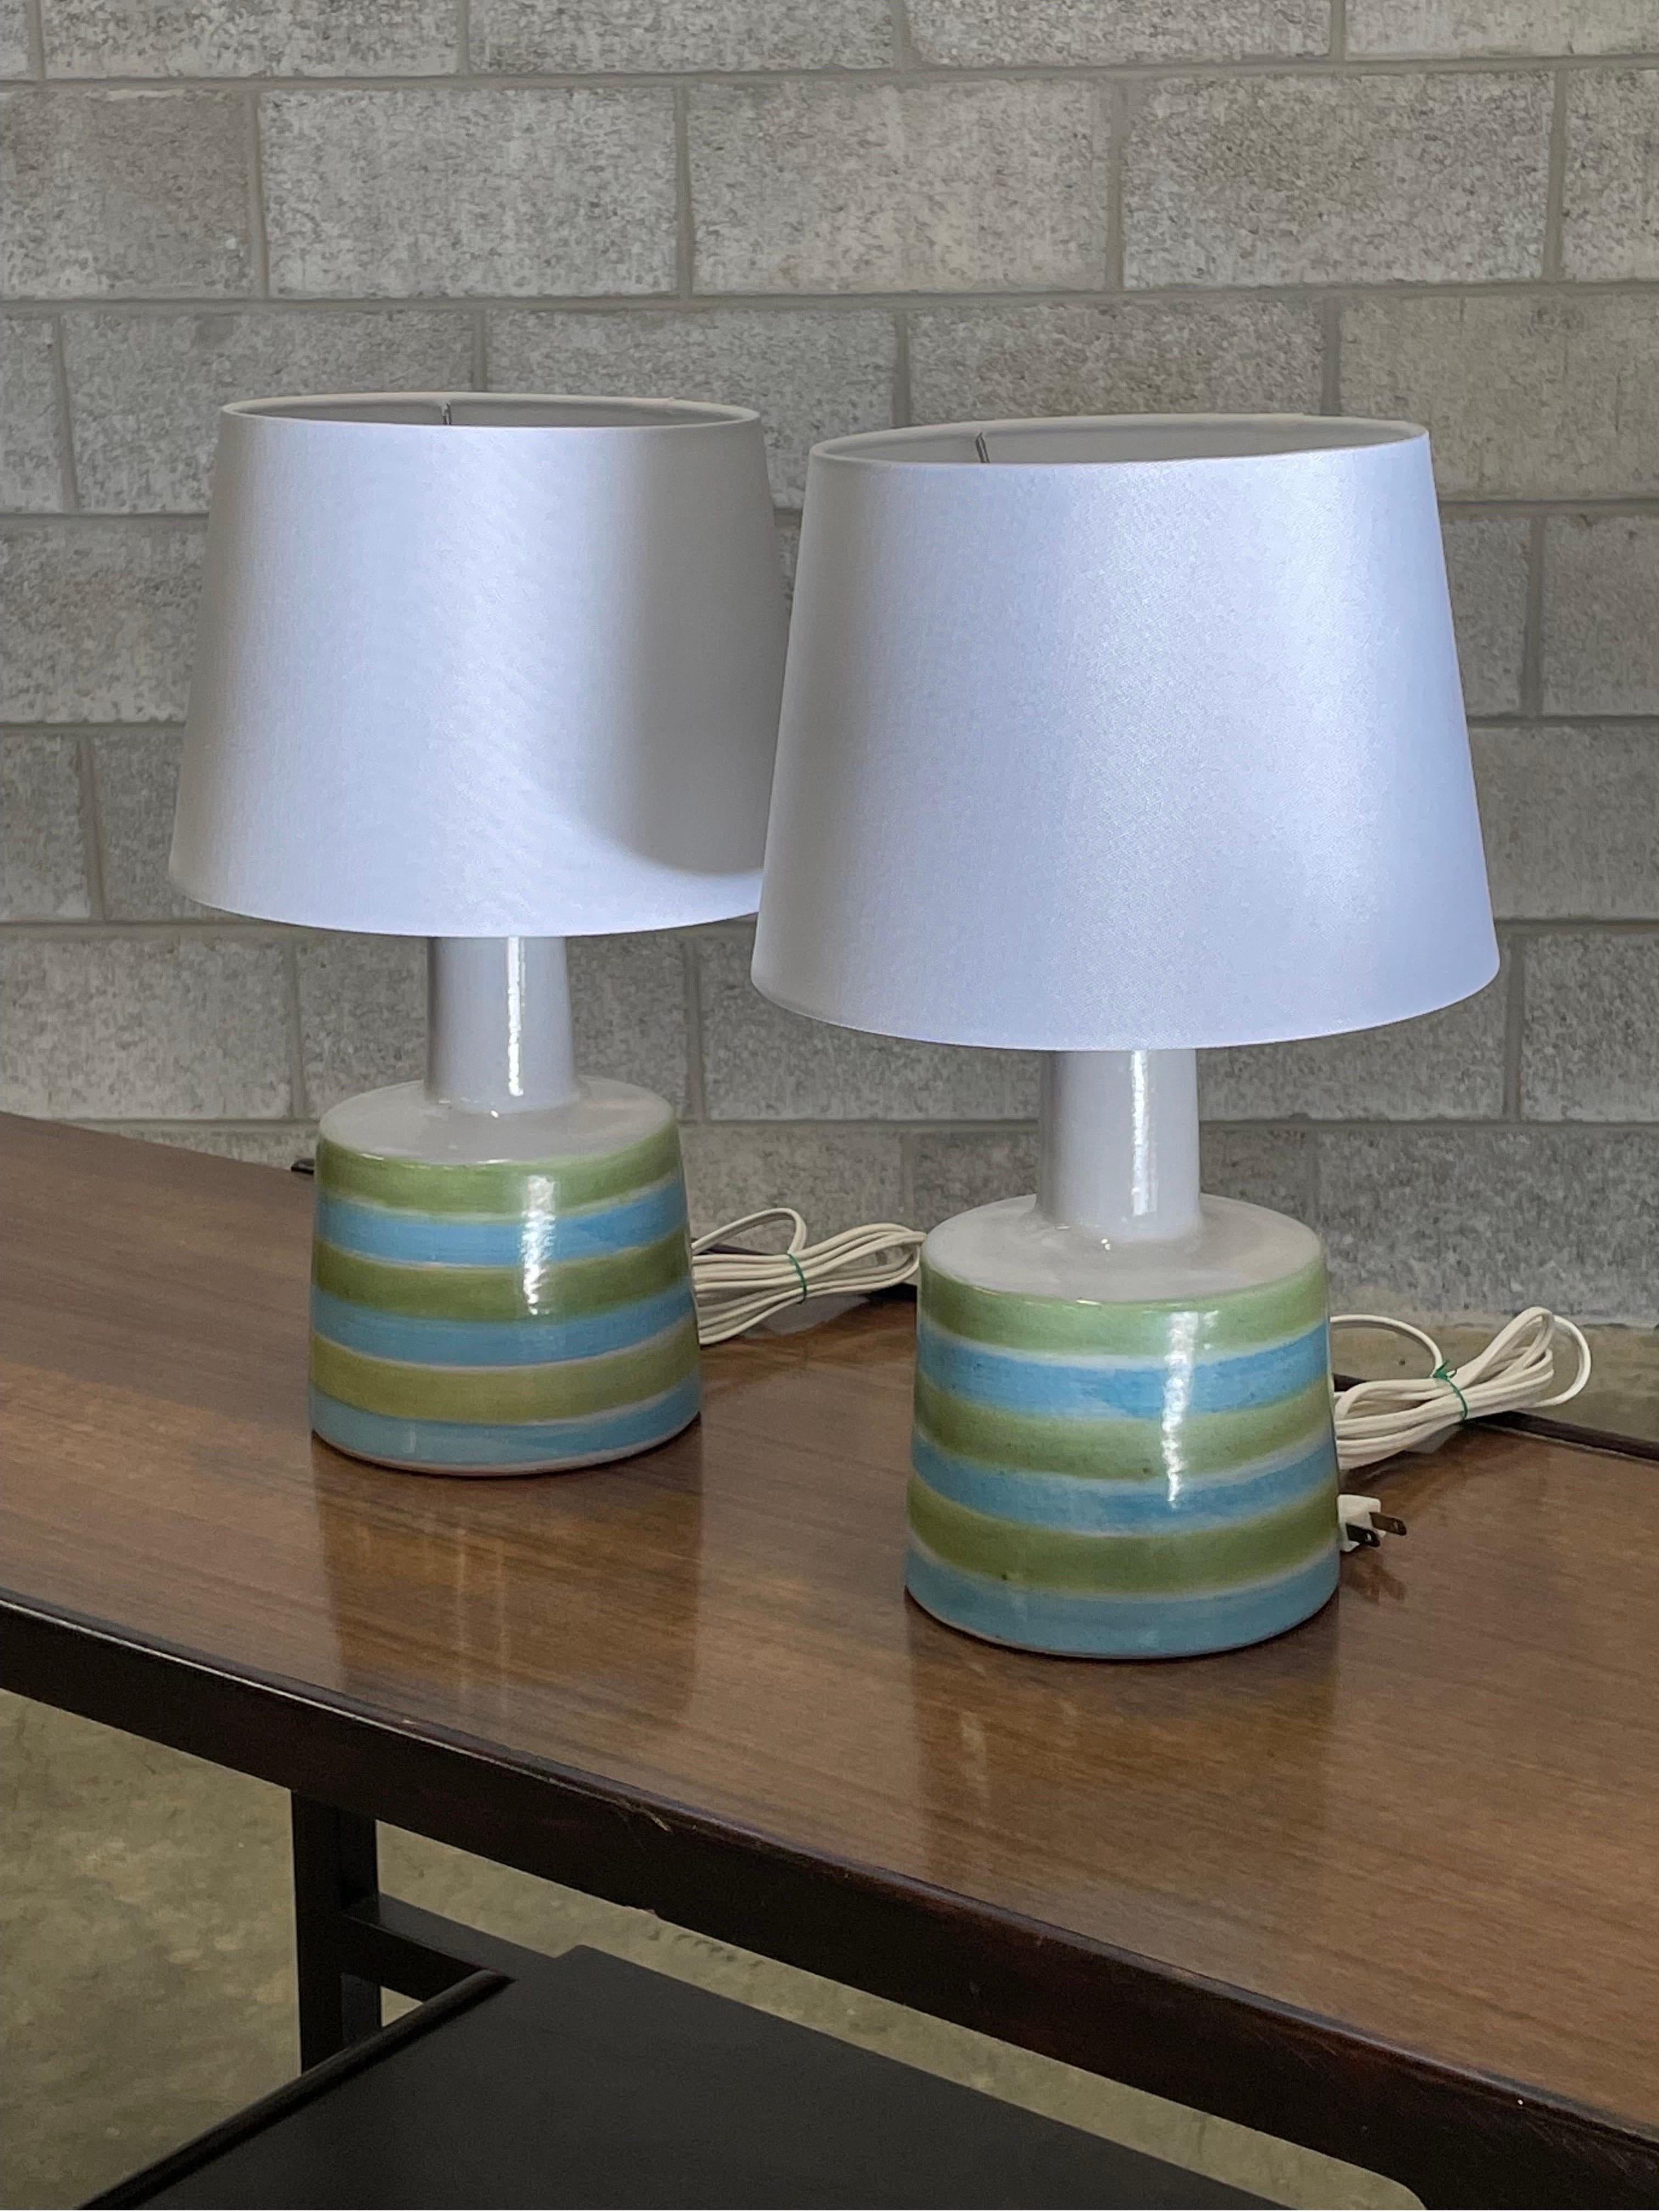 Table lamps designed by ceramicist duo Jane and Gordon Martz for Marshall Studios. Color is a main white body with green and blue stripes.

Overall dimensions: 16” tall 10” wide.
Ceramic portion only 9” tall 6” across.